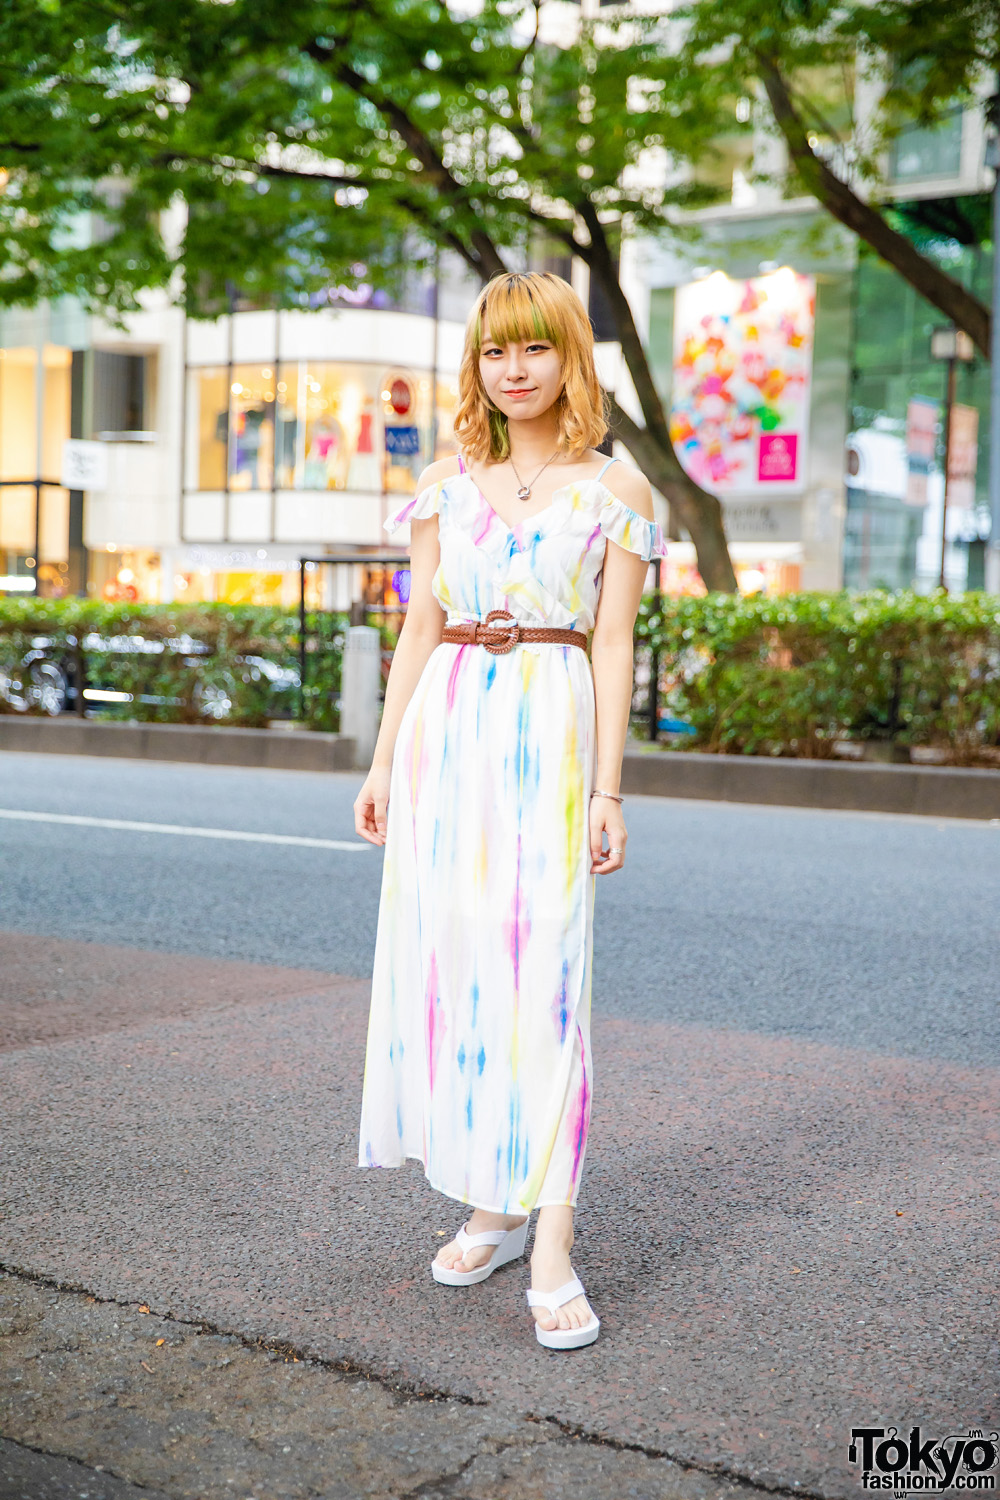 Harajuku Girl  Style w/ Curly Bob, Bless Accessories, Braided Belt, Cecil McBee Cutout Shoulder Maxi Dress & White Wedge Sandals